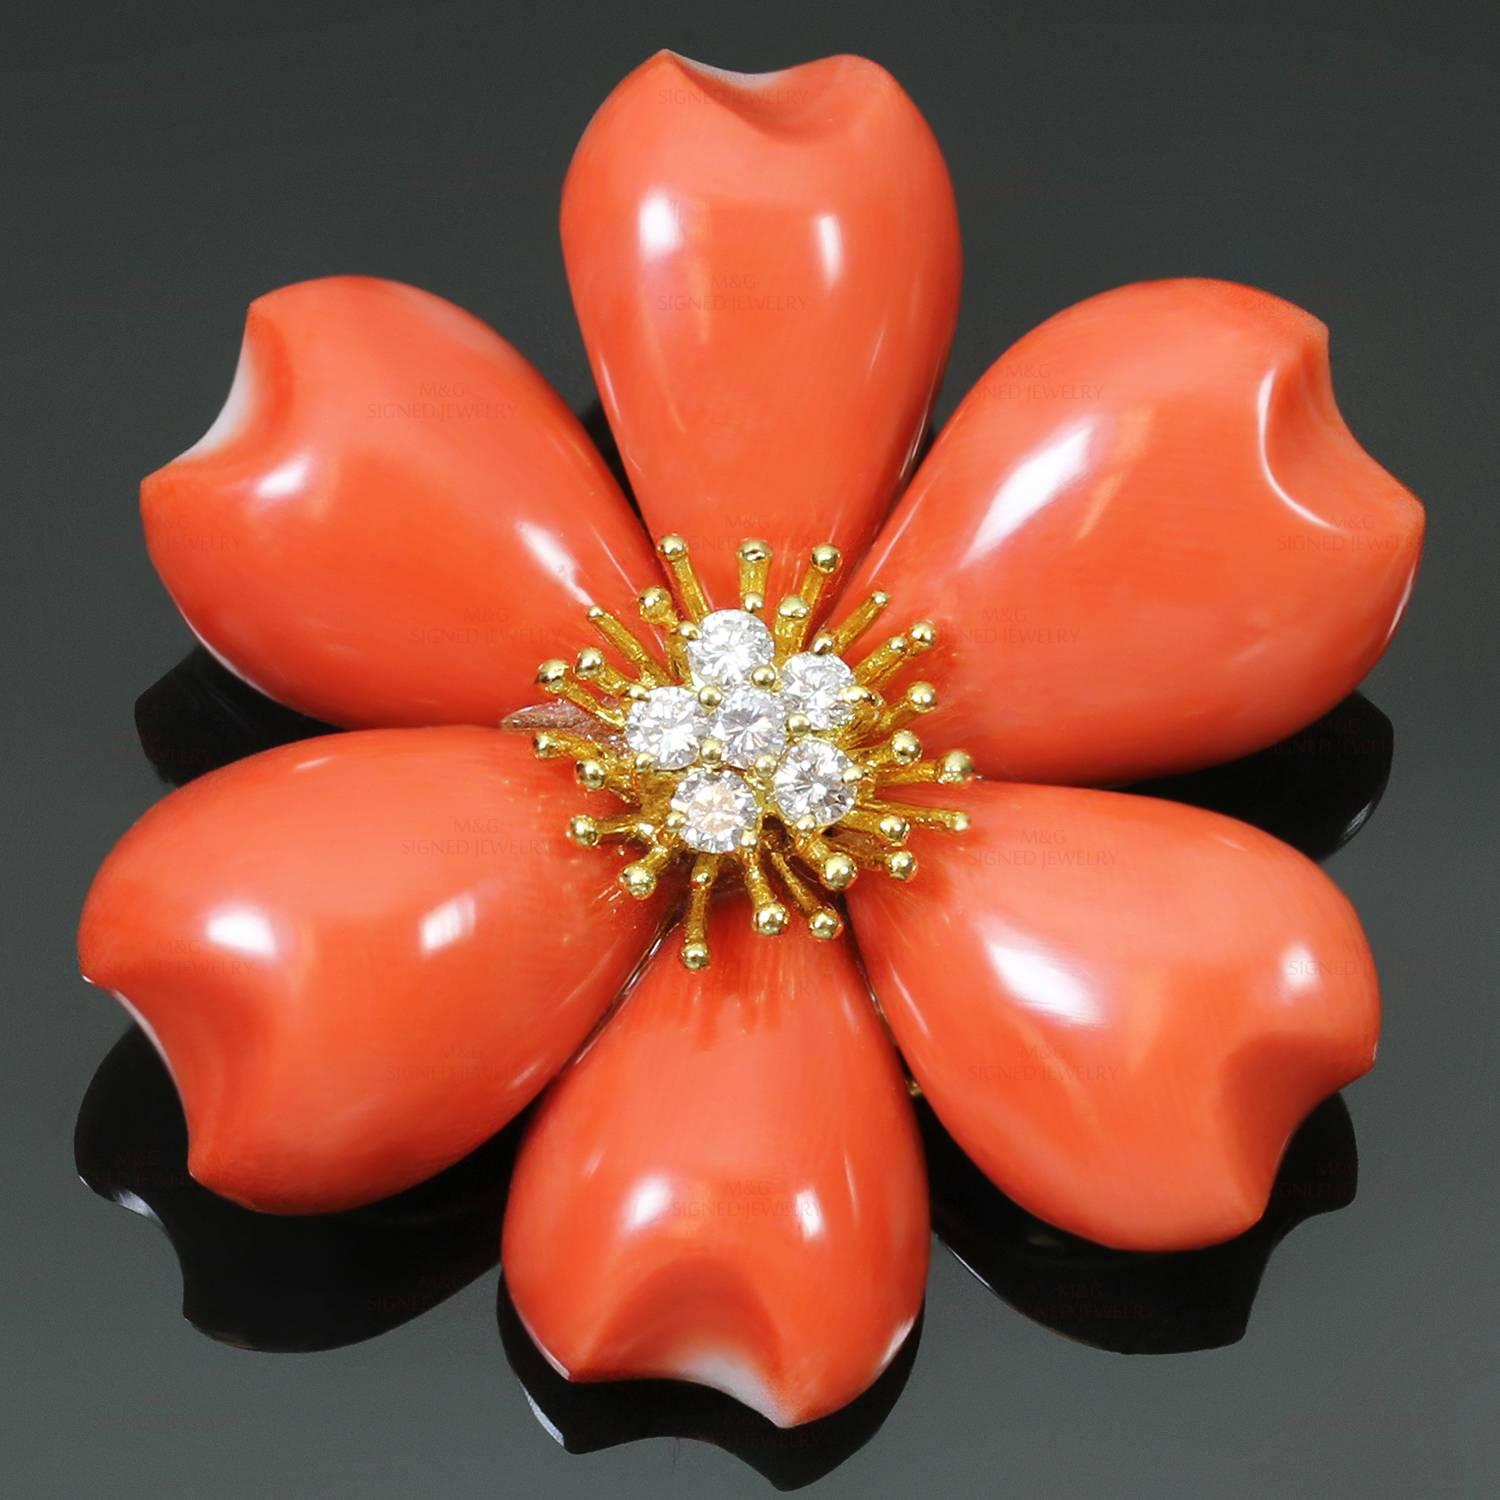 This gorgeous Italian brooch is crafted in 18k yellow gold and features a flower-shaped design with natural carved red coral petals and a sparkling center of full-cut diamonds weighing an estimated 0.30 carats. Measurements: 1.61" (41mm) width. 